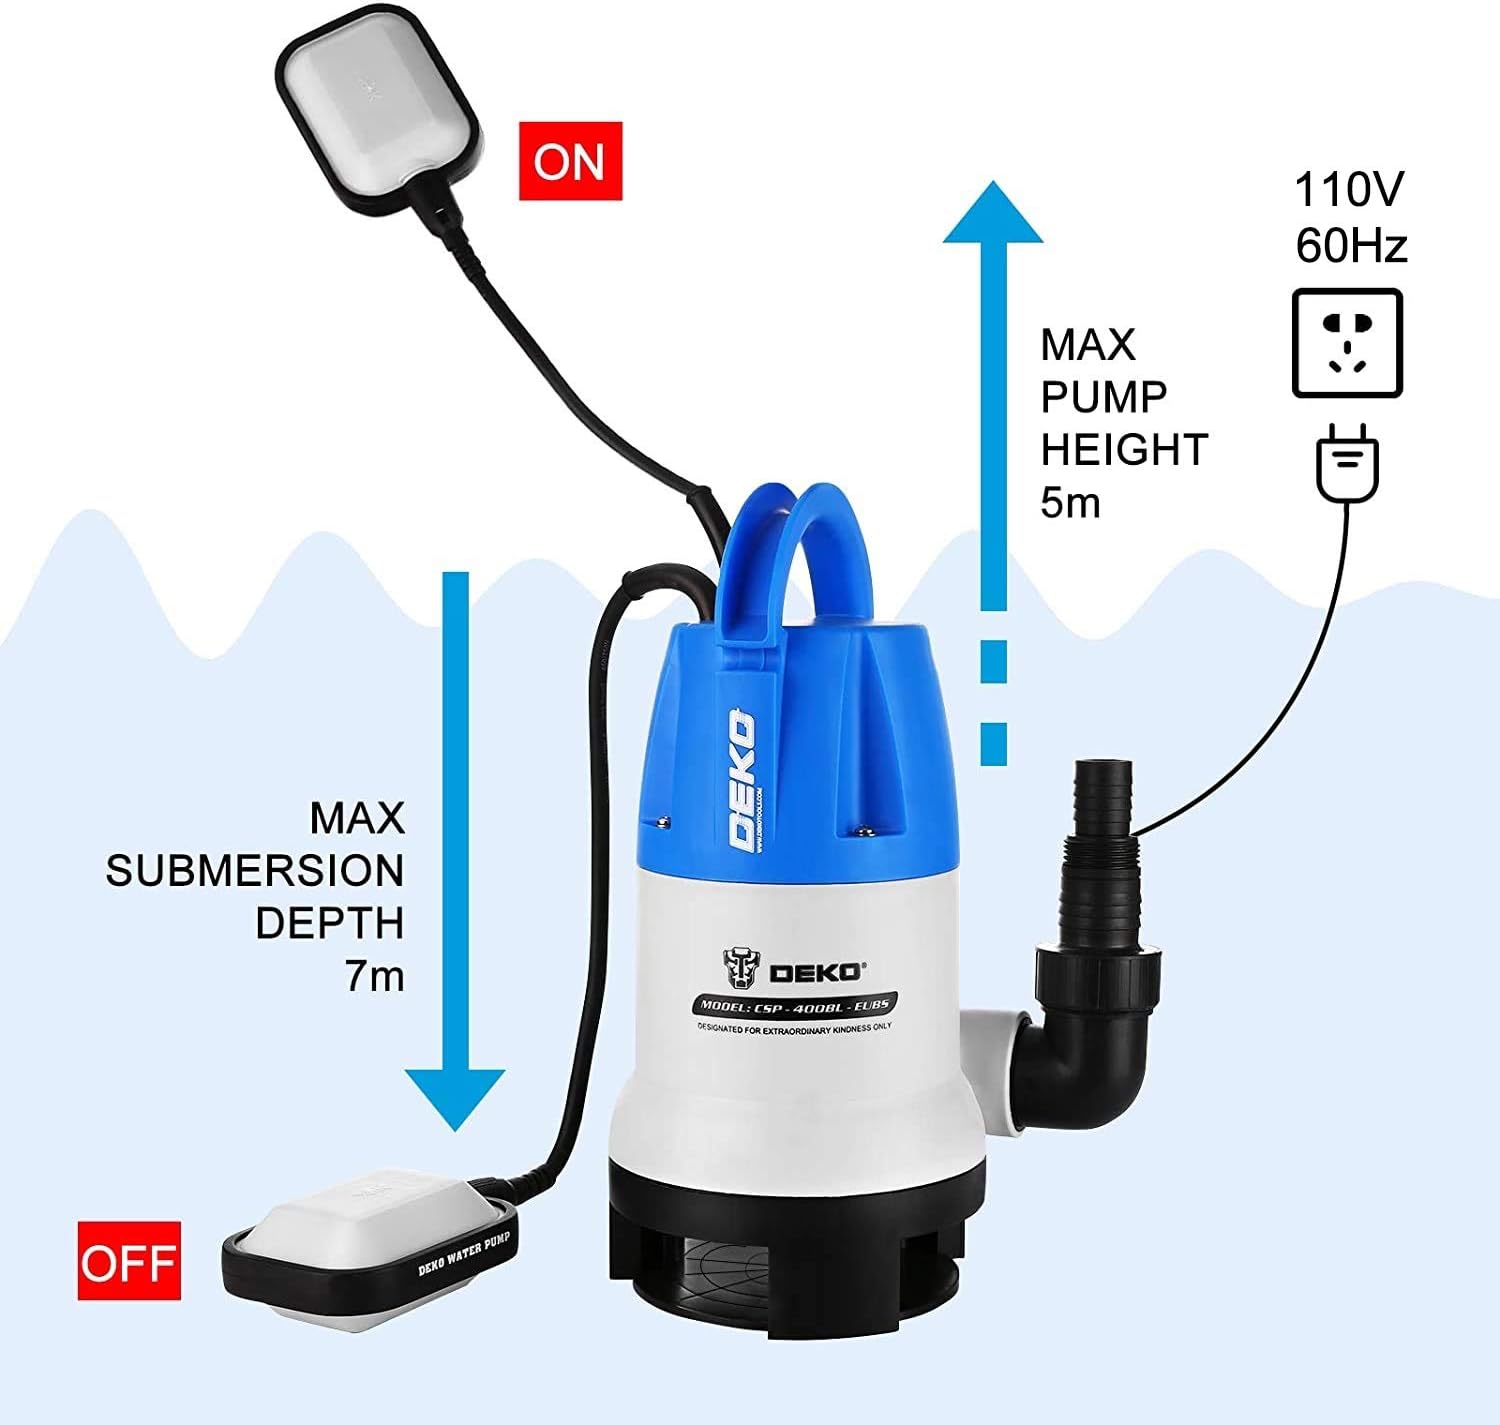 DEKOPRO DEKO 400W 1/2HP Sump Pump 2113GPH Portable Submersible Pump with Float Switch,Clean/Dirty Water Removal Drain Pump for Swimming